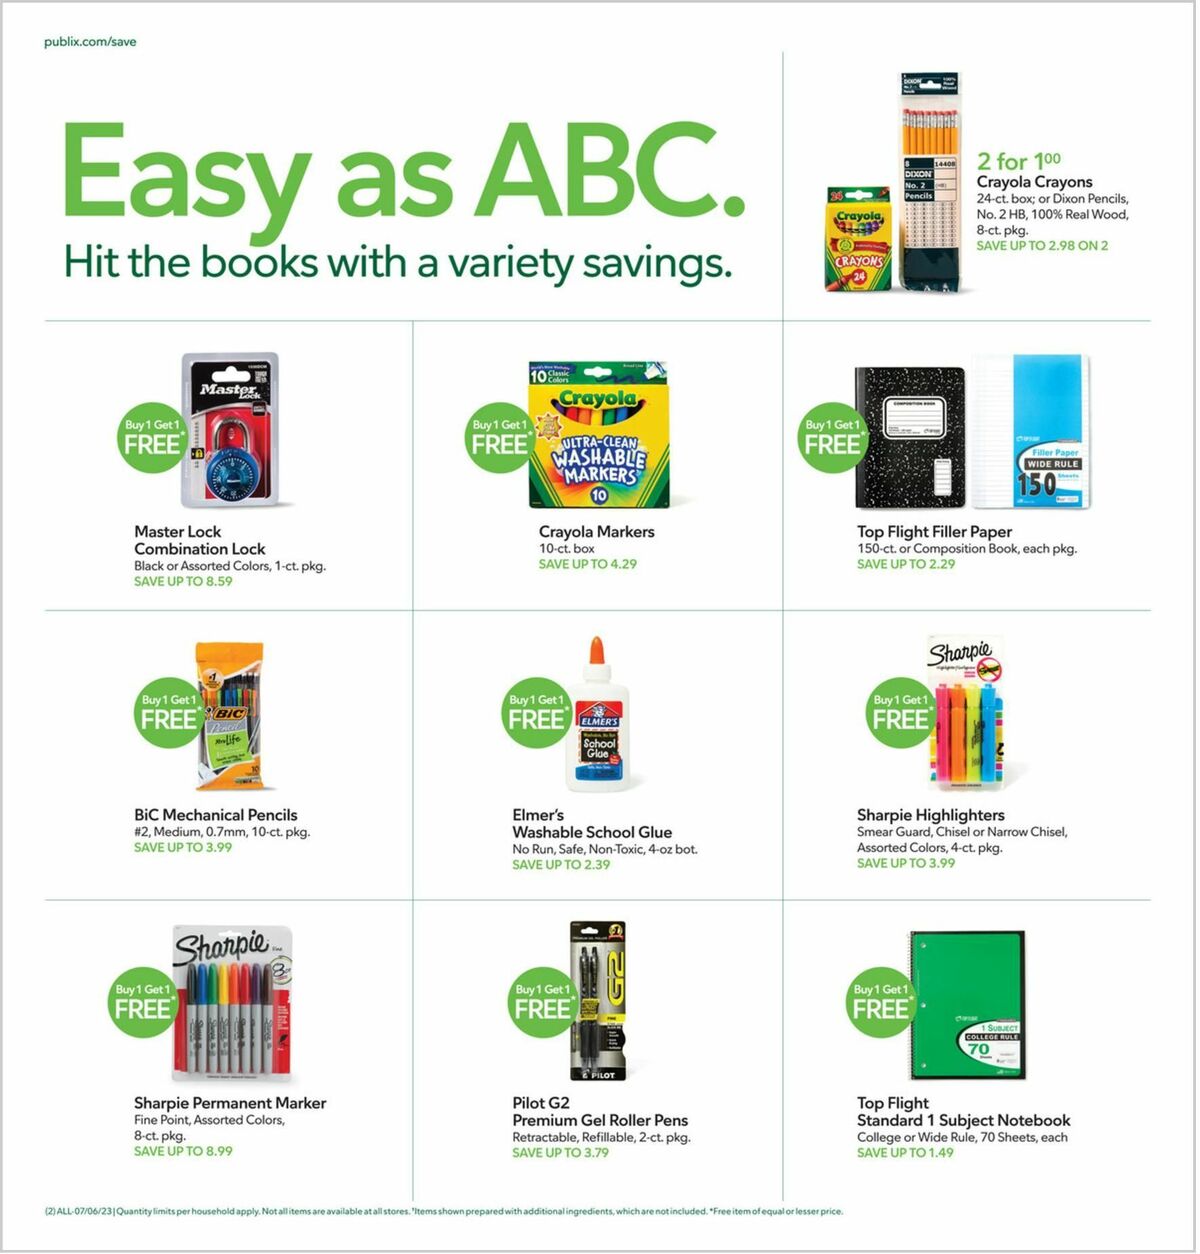 Publix Weekly Ad from July 5